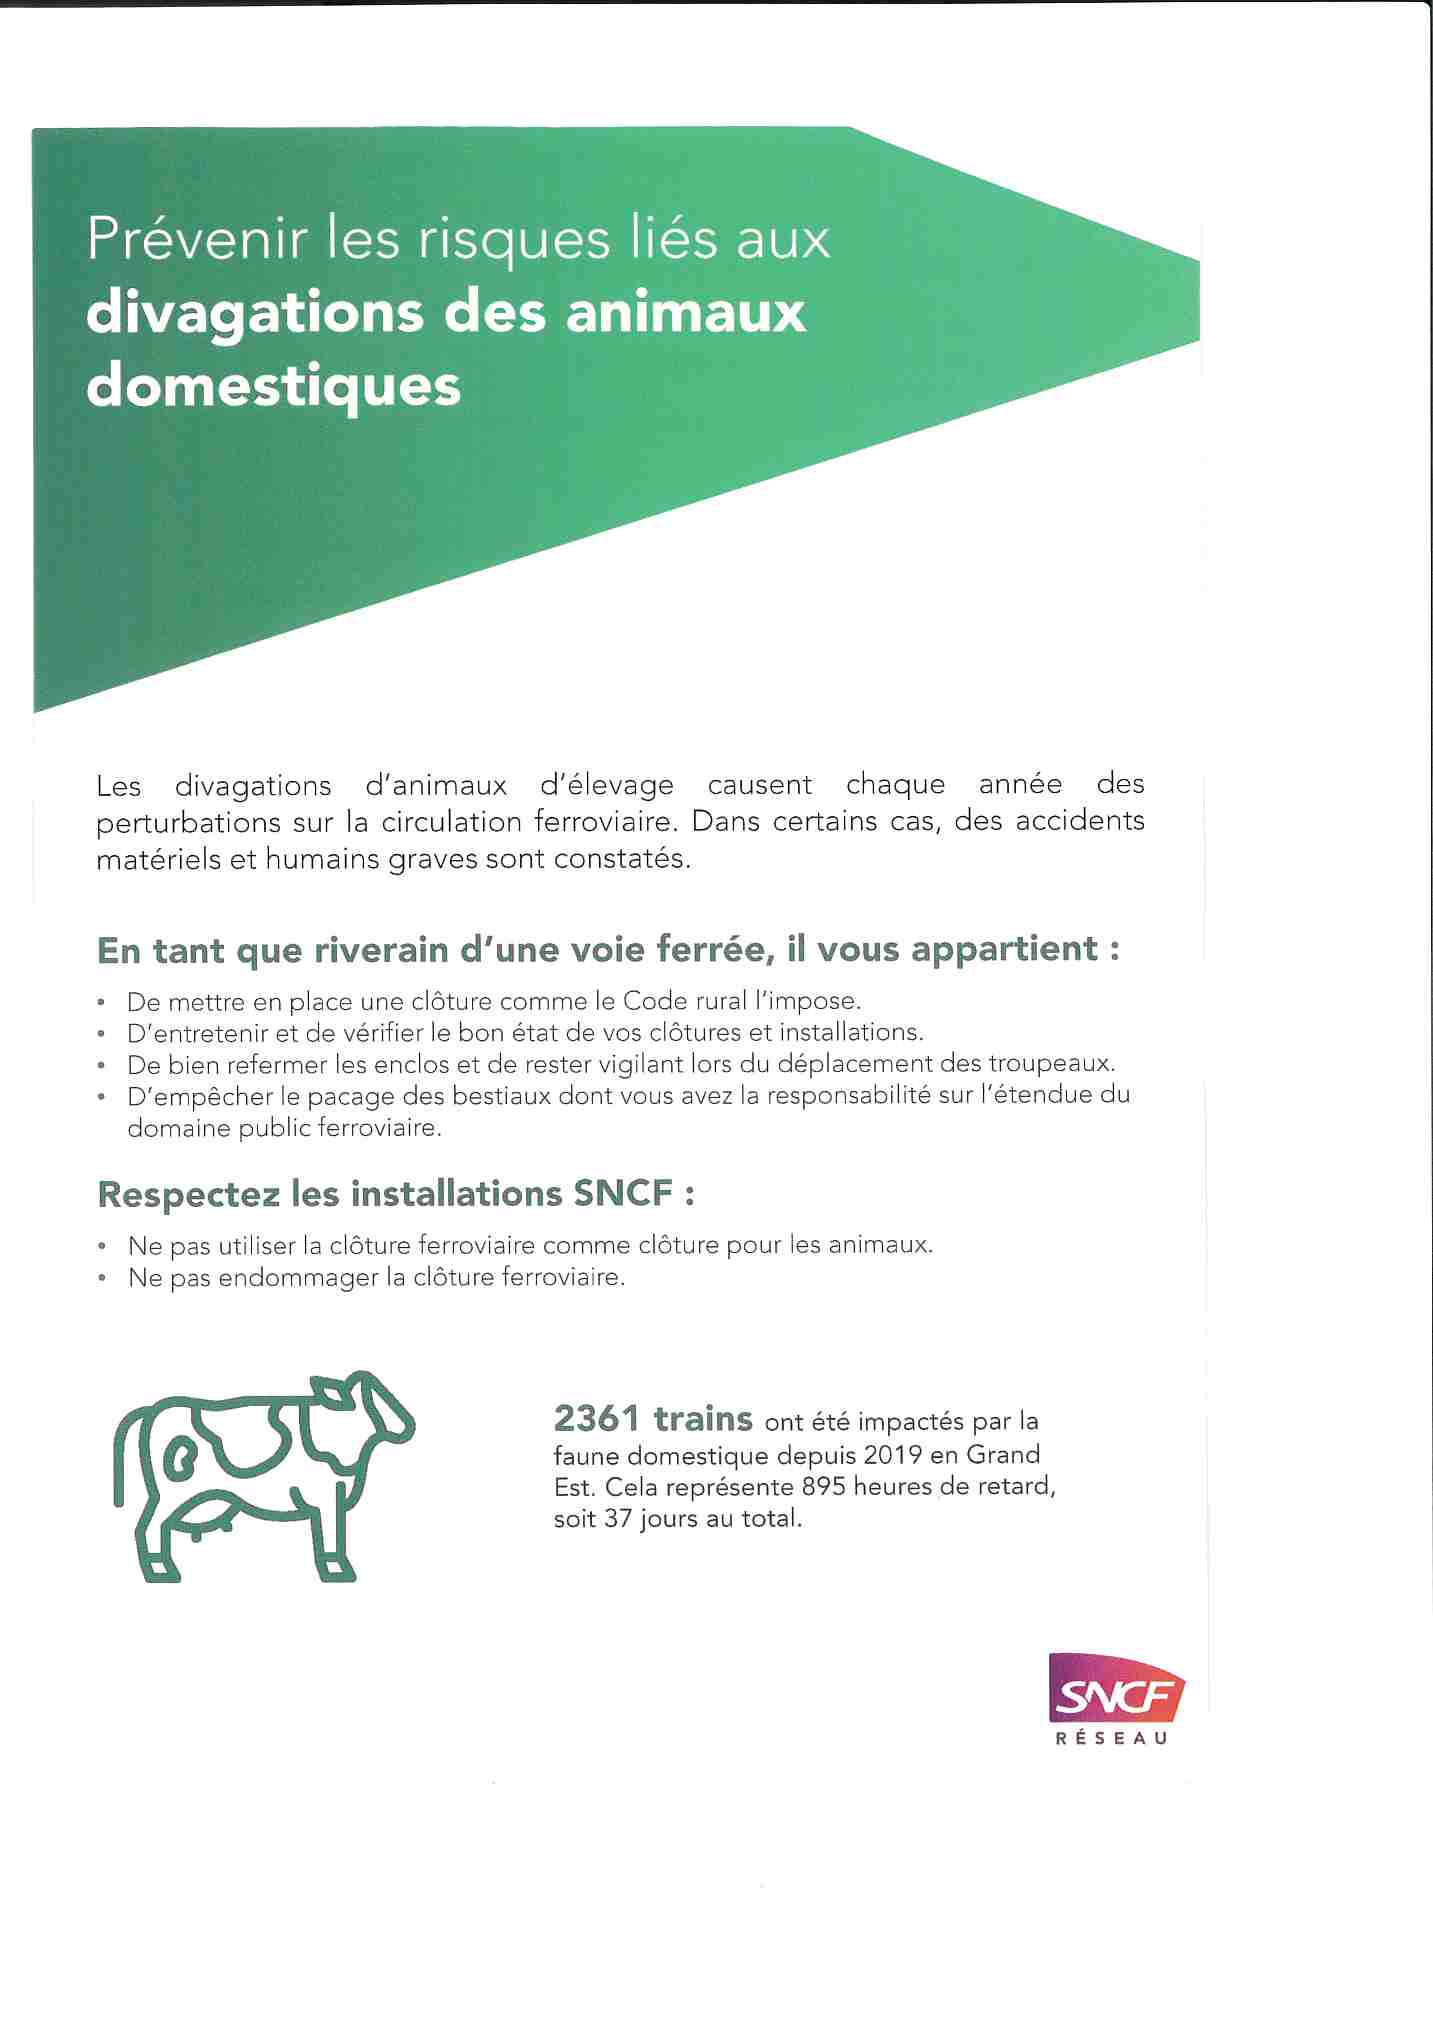 DIVAGATIONS ANIMAUX SNCF_0001.jpg